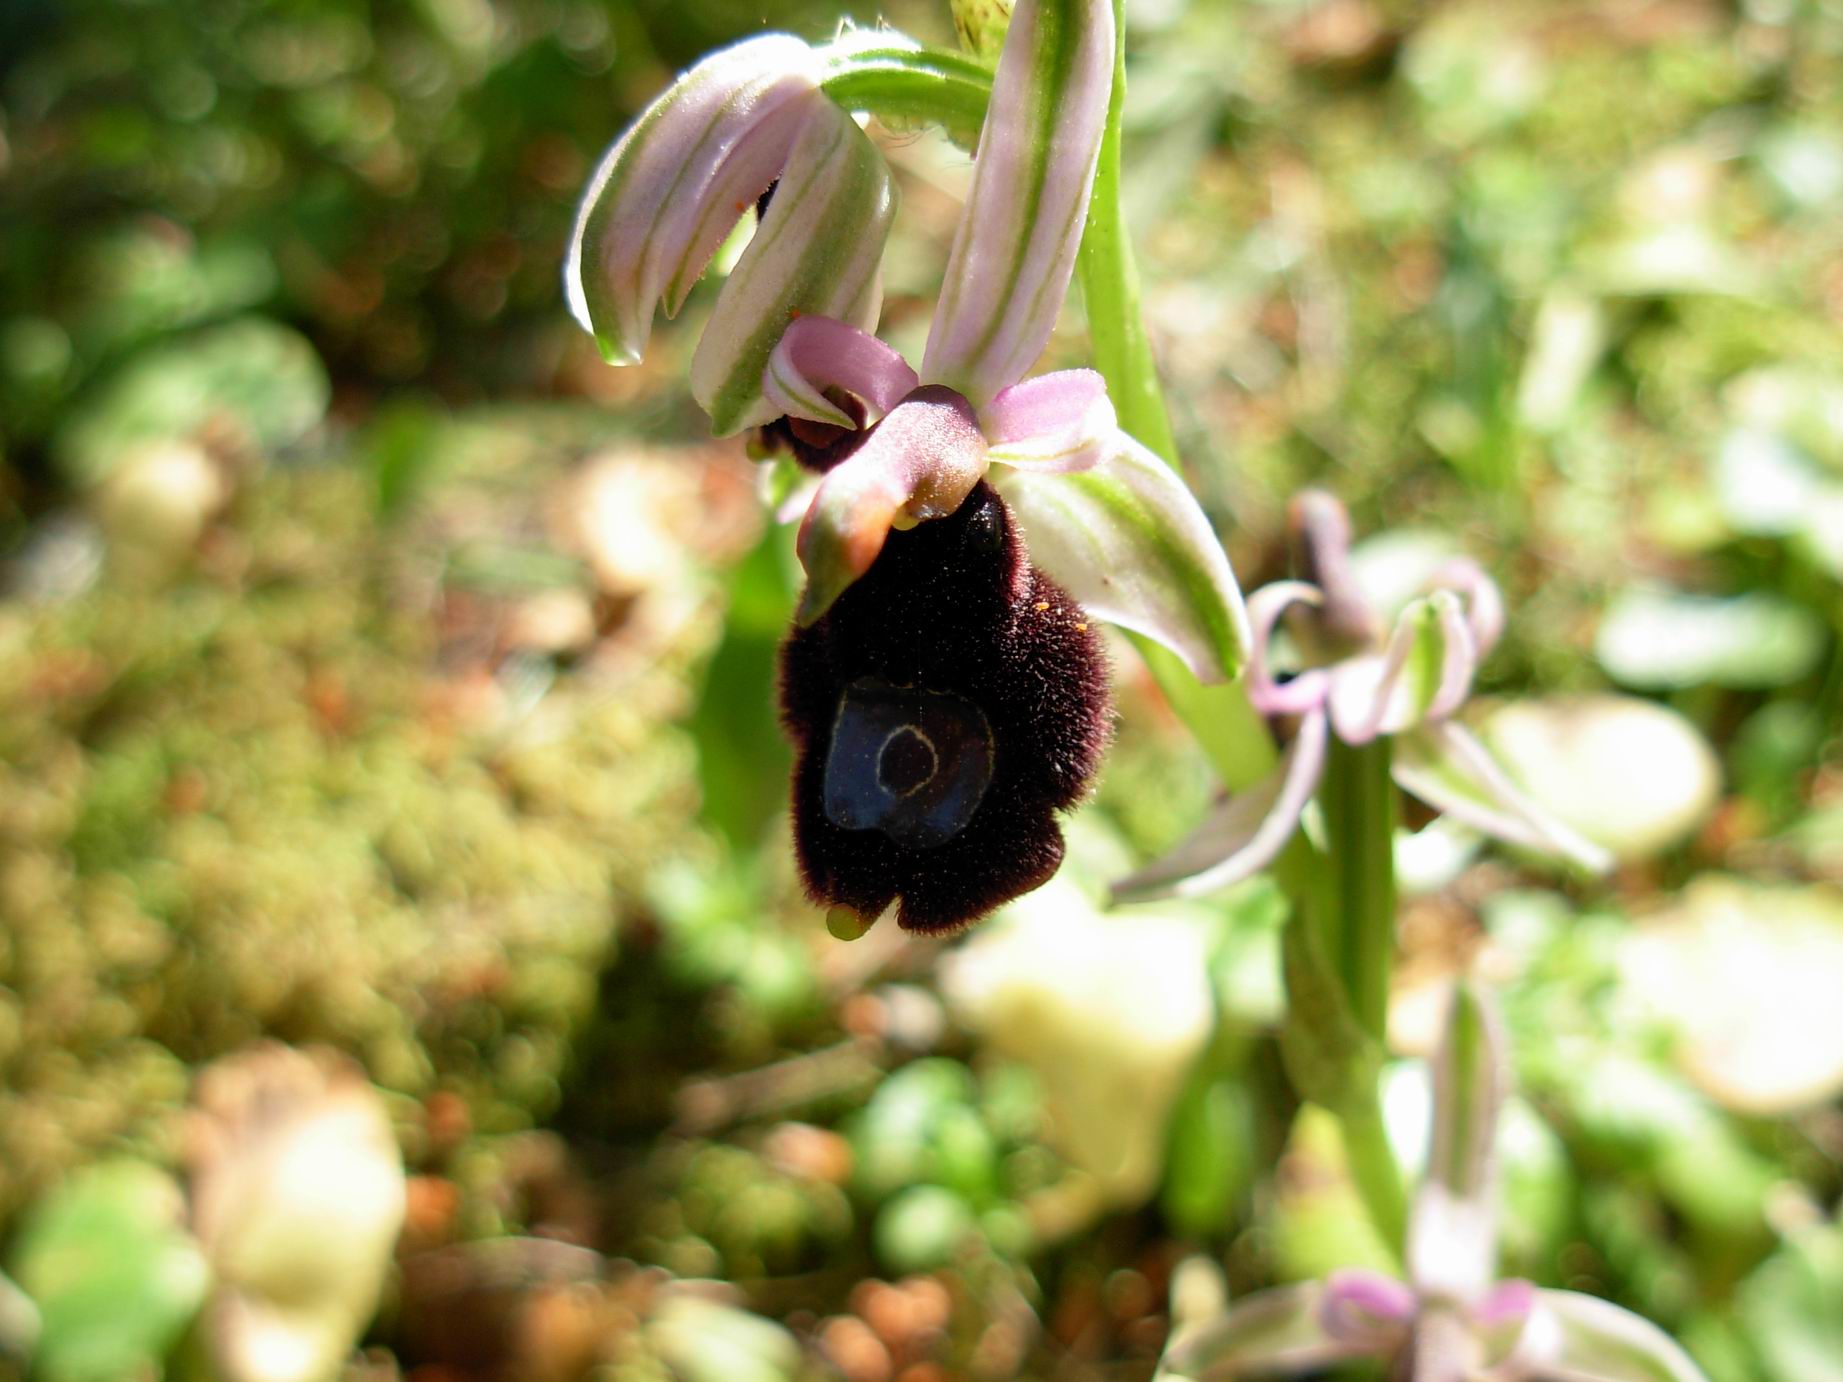 Ophrys explanata